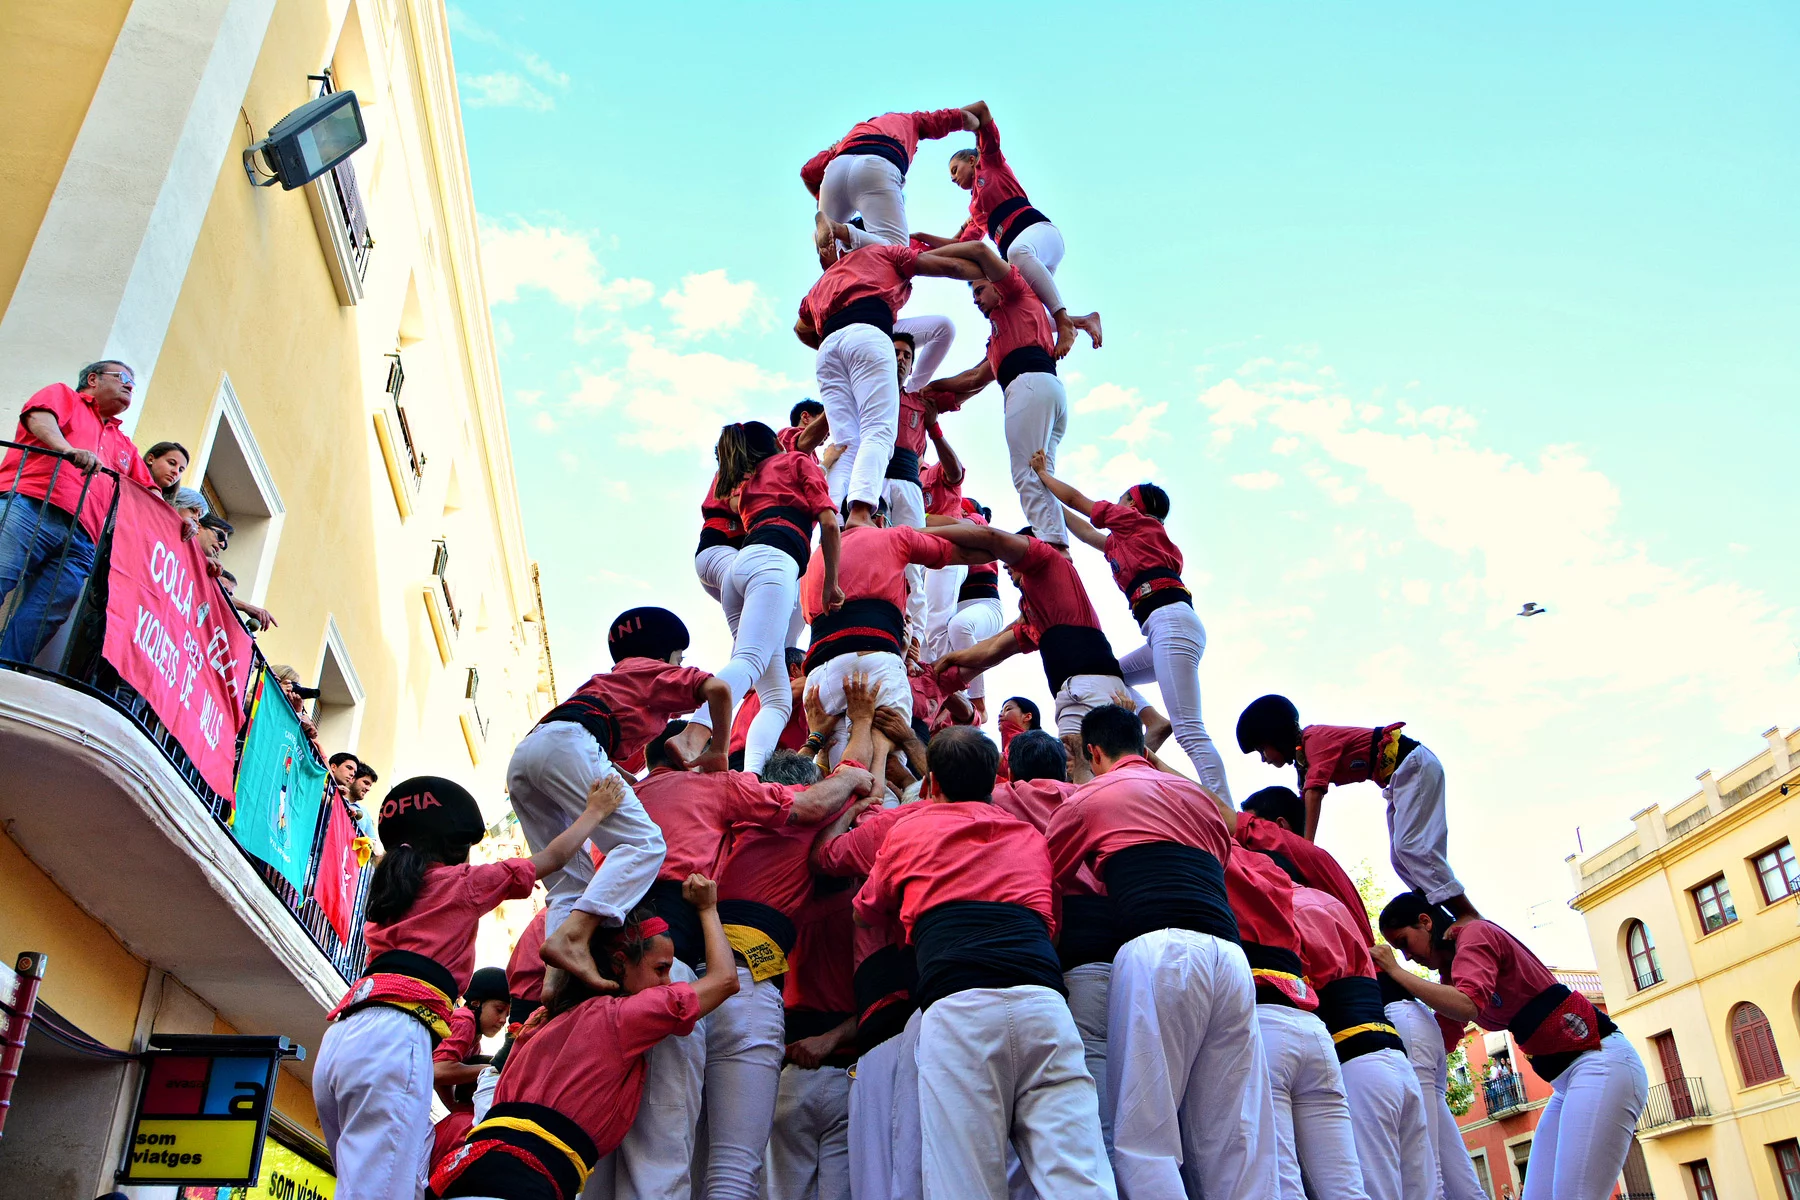 Catalan tradition of the human tower